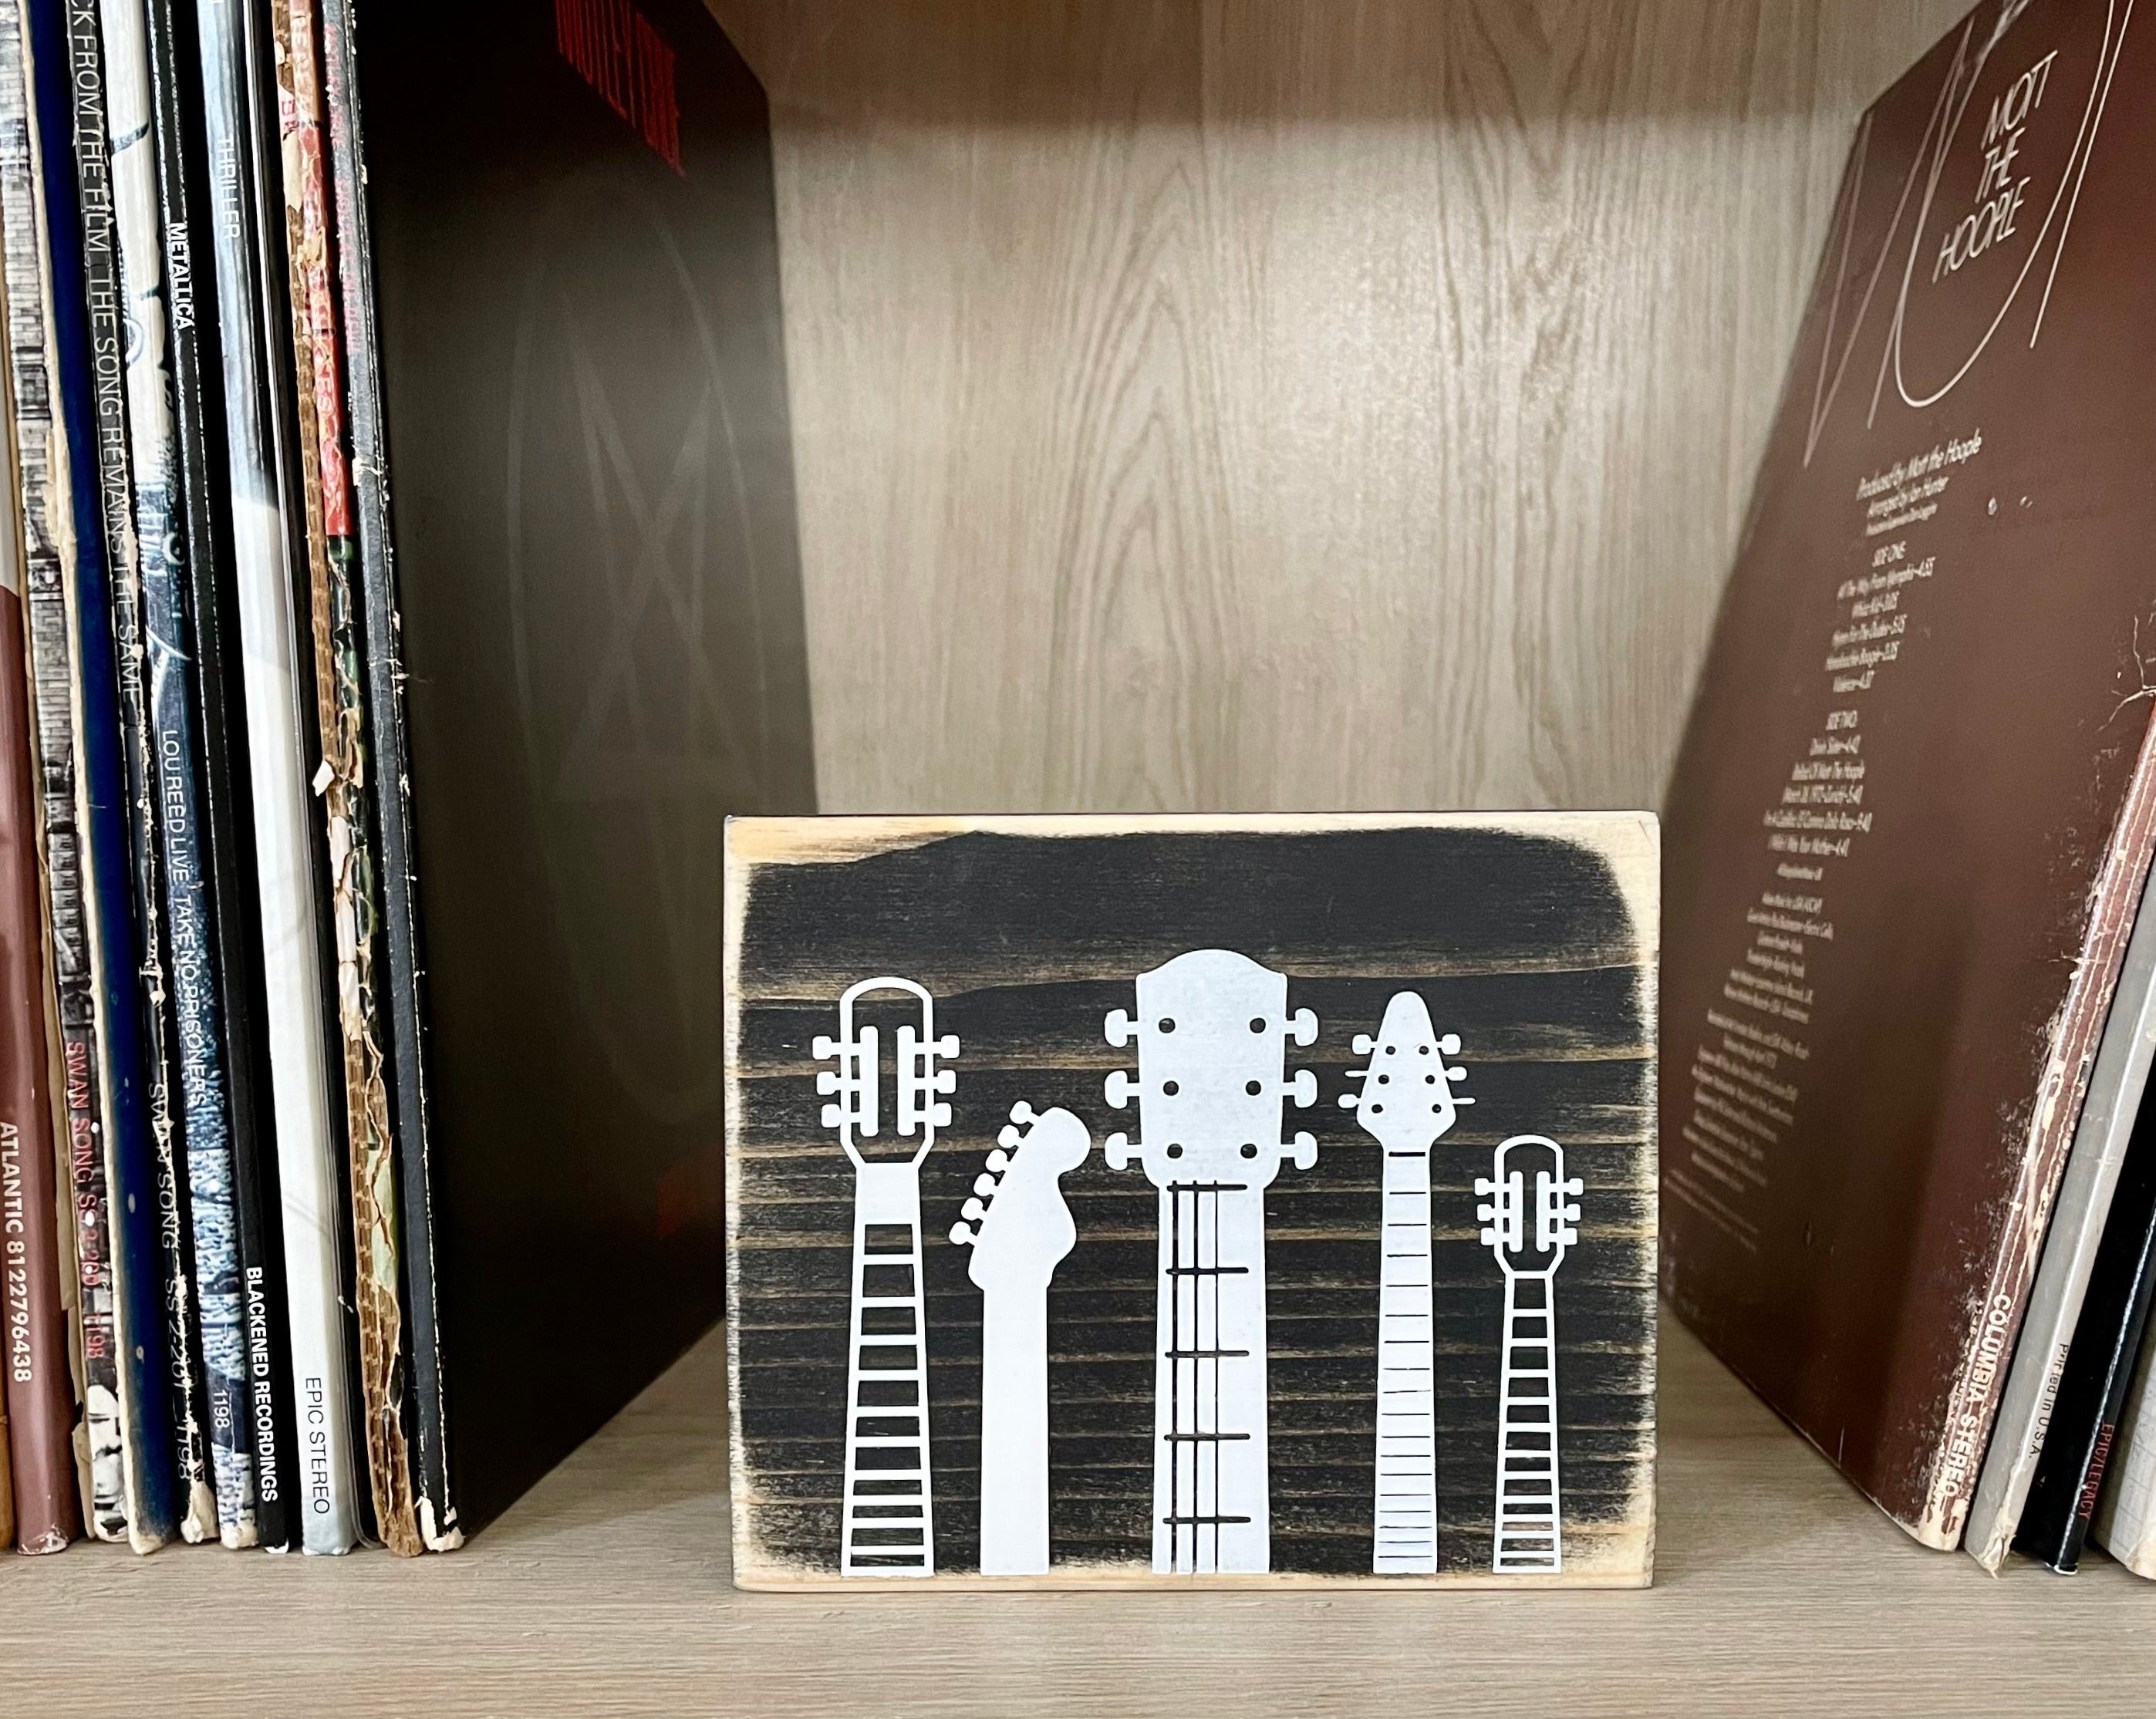 A small, rustic, black, wood sign with white guitar heads on it, sits on a shelf next to vinyl records.